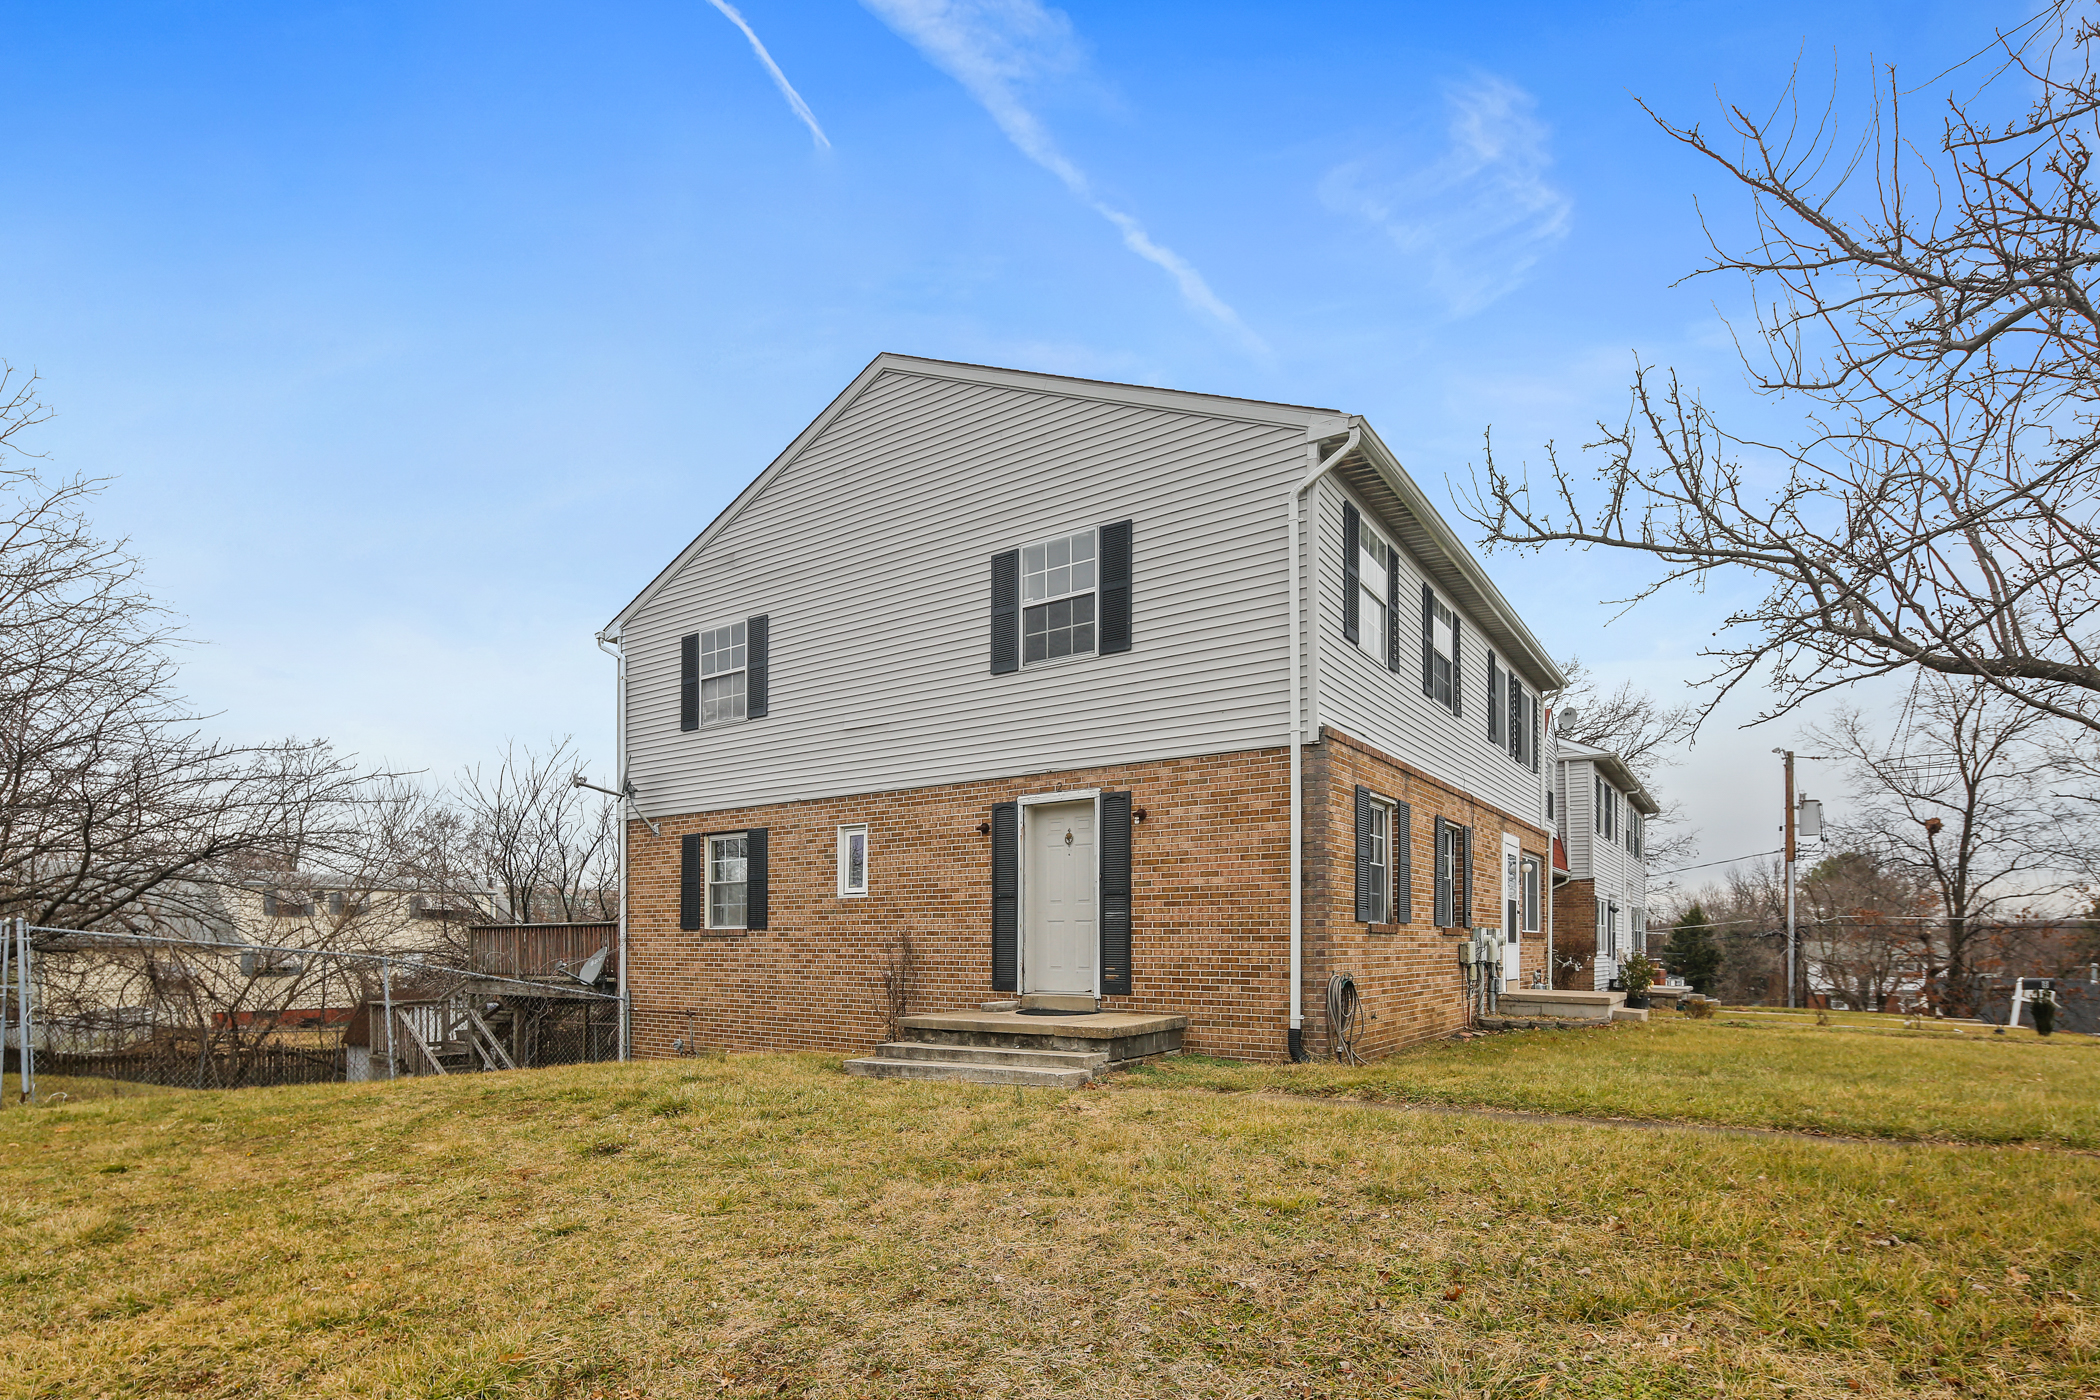 2 McLendon Court: Rehab Opportunity in Baltimore County